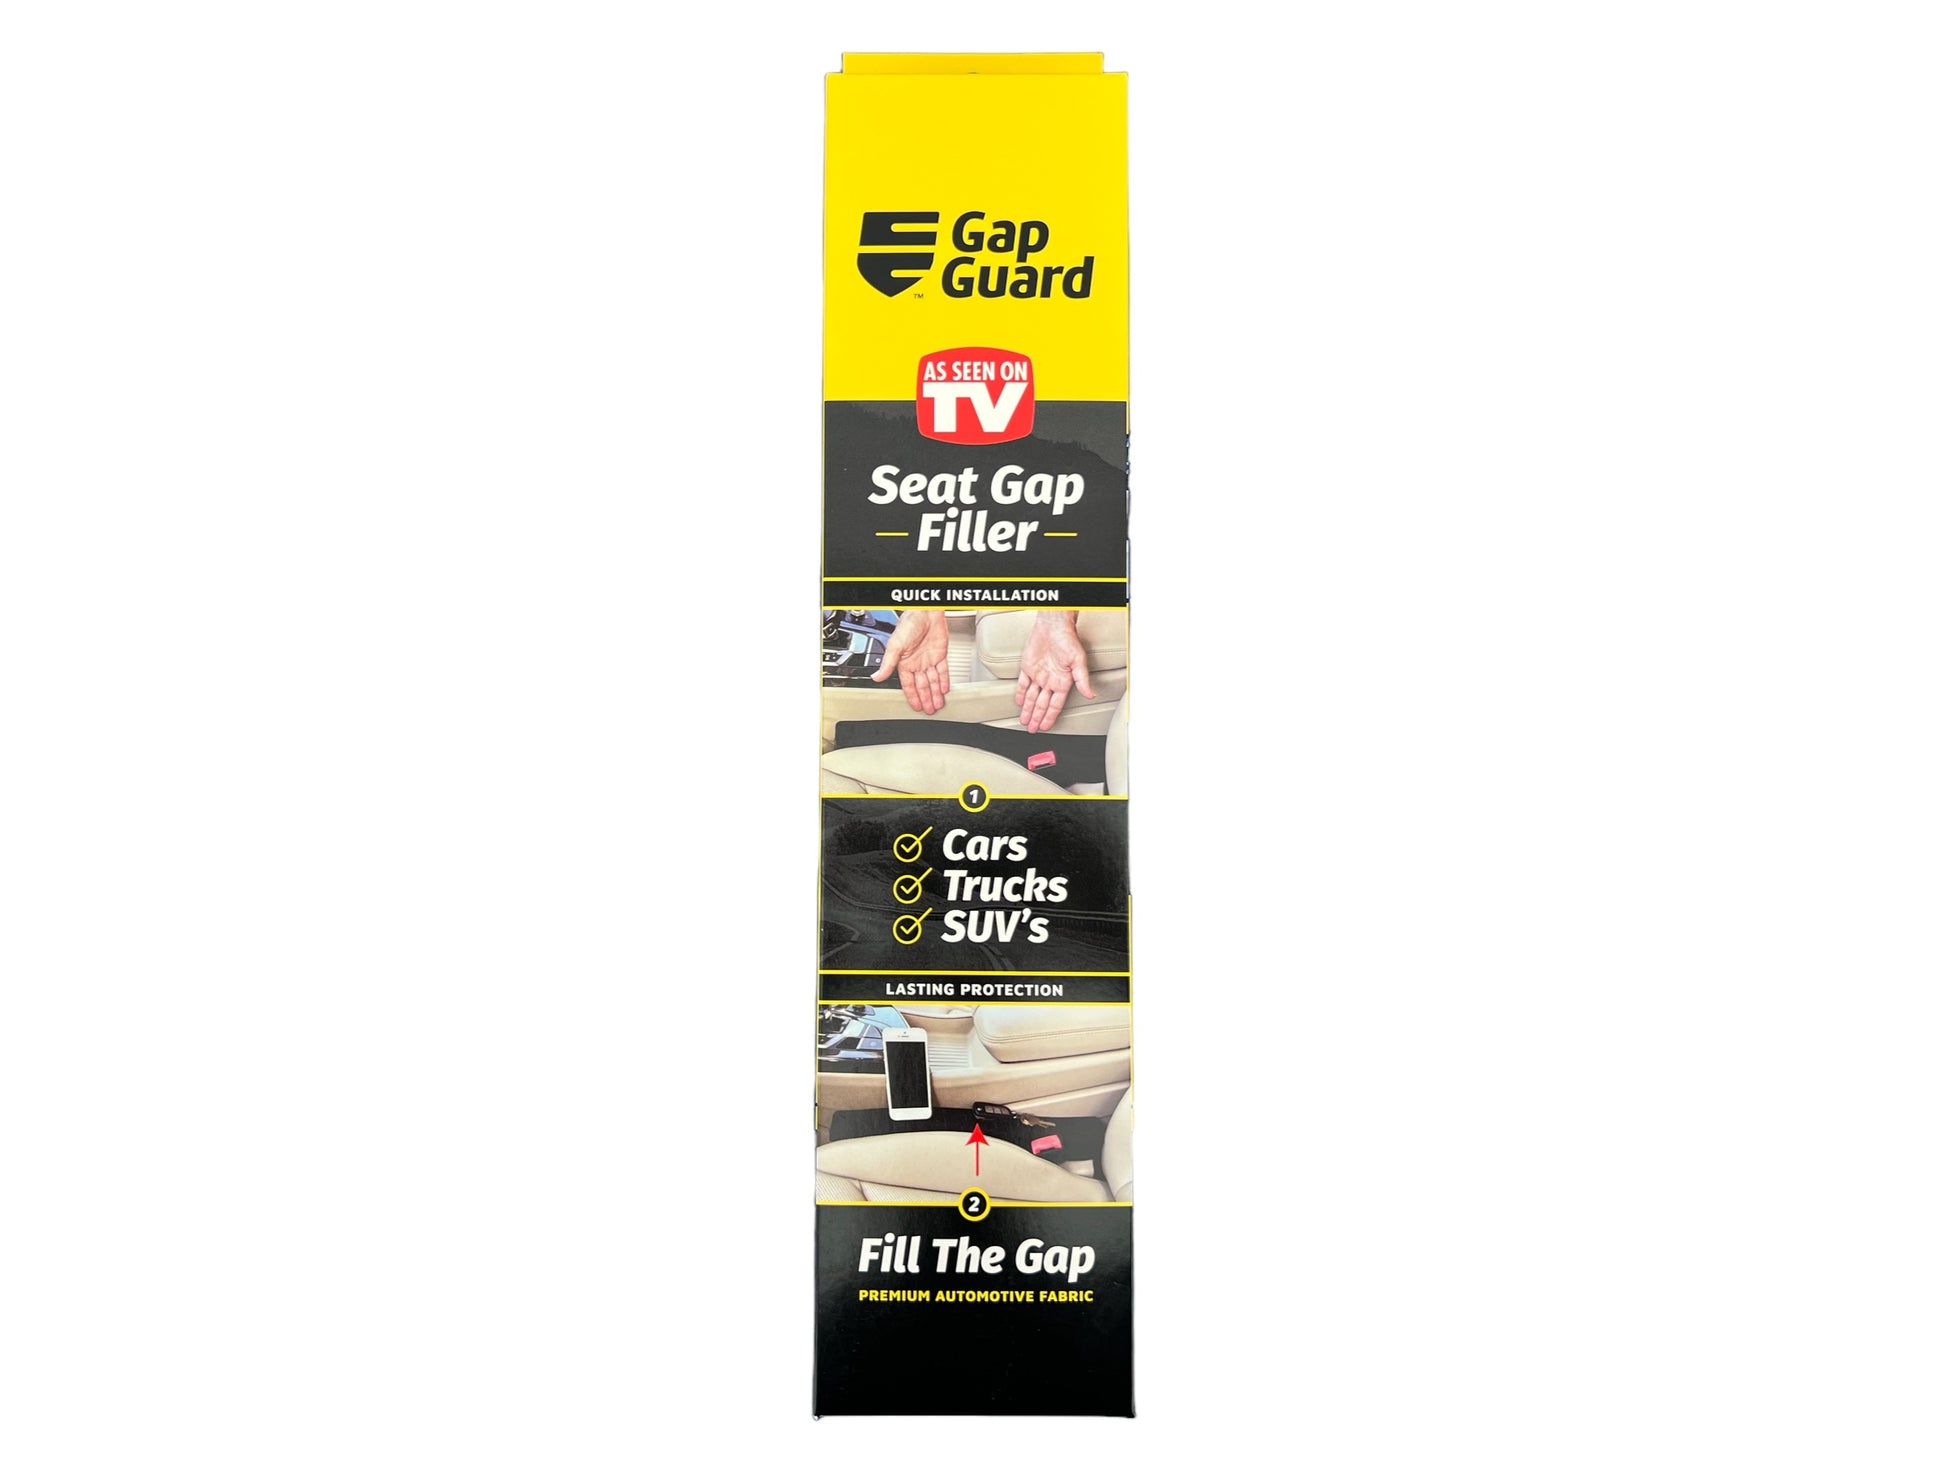 GAP GUARD - Car Seat Gap Filler - Fill The Gap Between The Seat and Ce –  One More Thing LLC